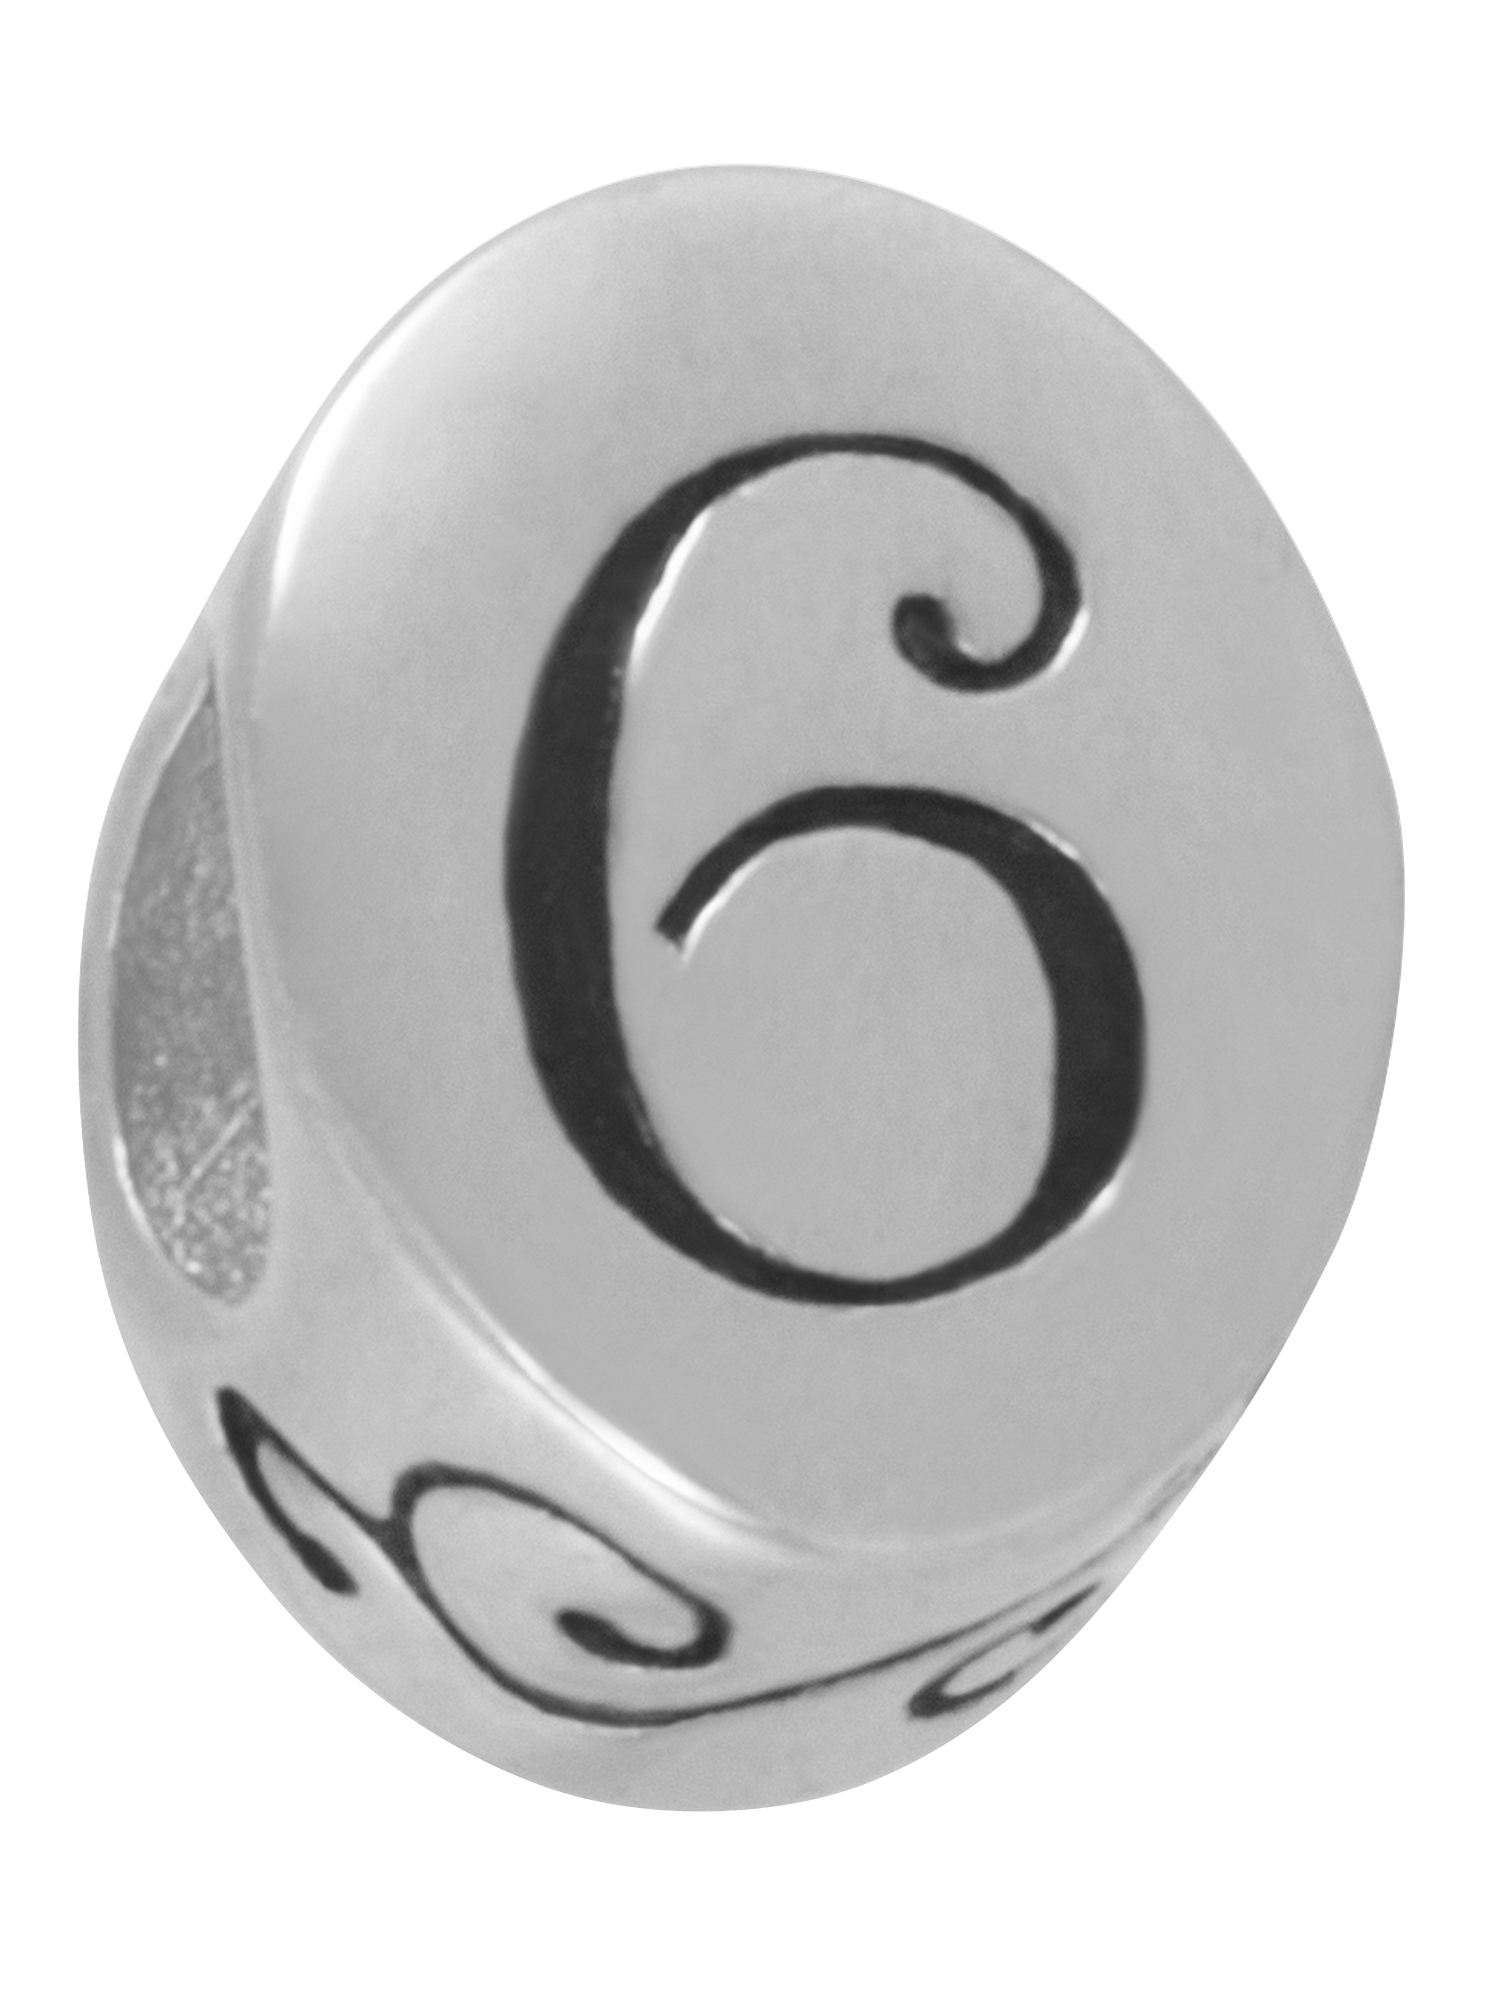 Connections from Hallmark Stainless Steel Number 6 Charm Bead - image 1 of 4